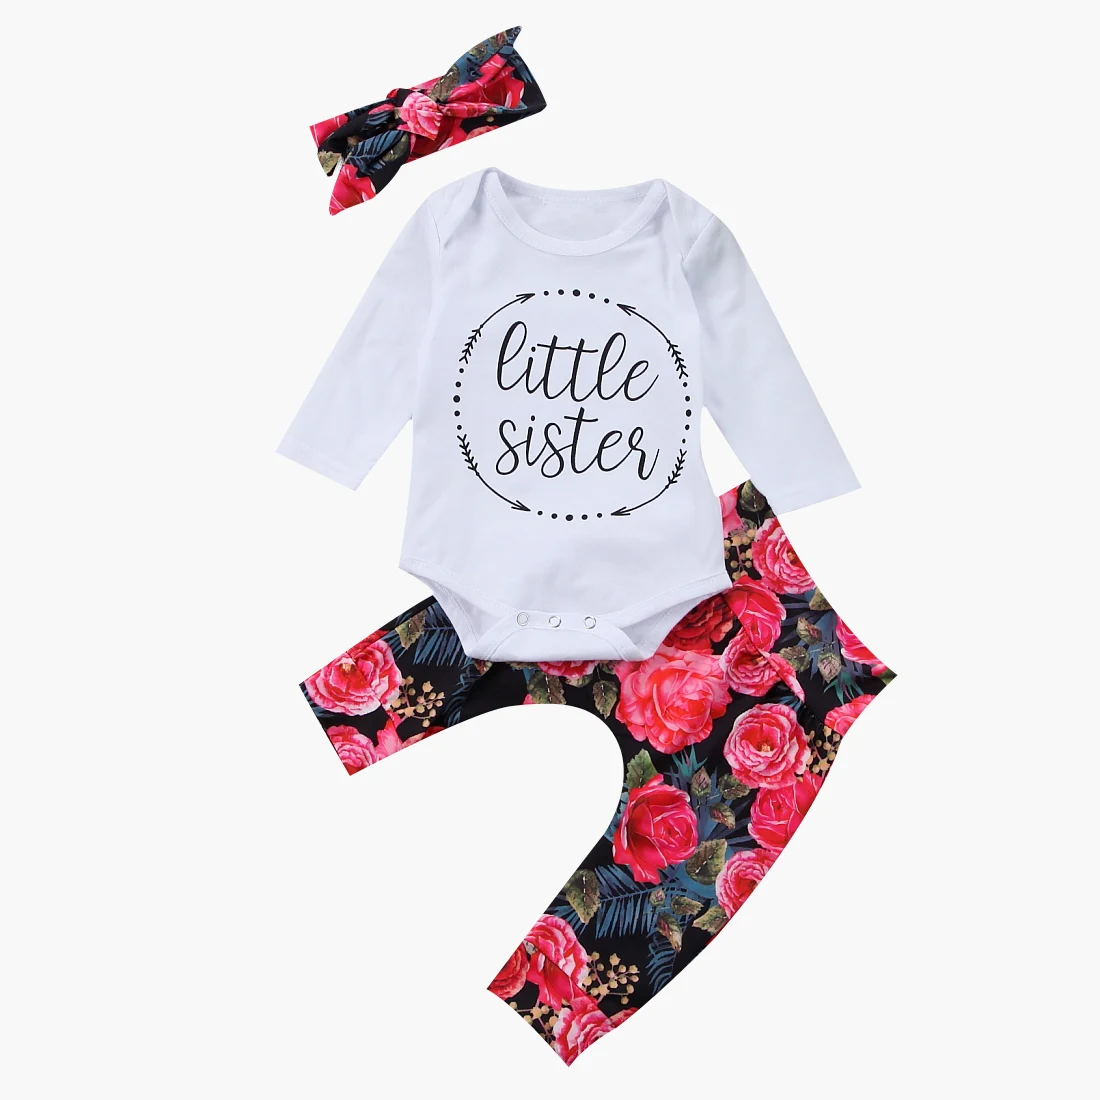 Long Sleeve Romper Flower Pants Headbands Cotton 3Pcs Outfits Clothing Set Newborn Toddler Baby Girls Clothes Sets Tops